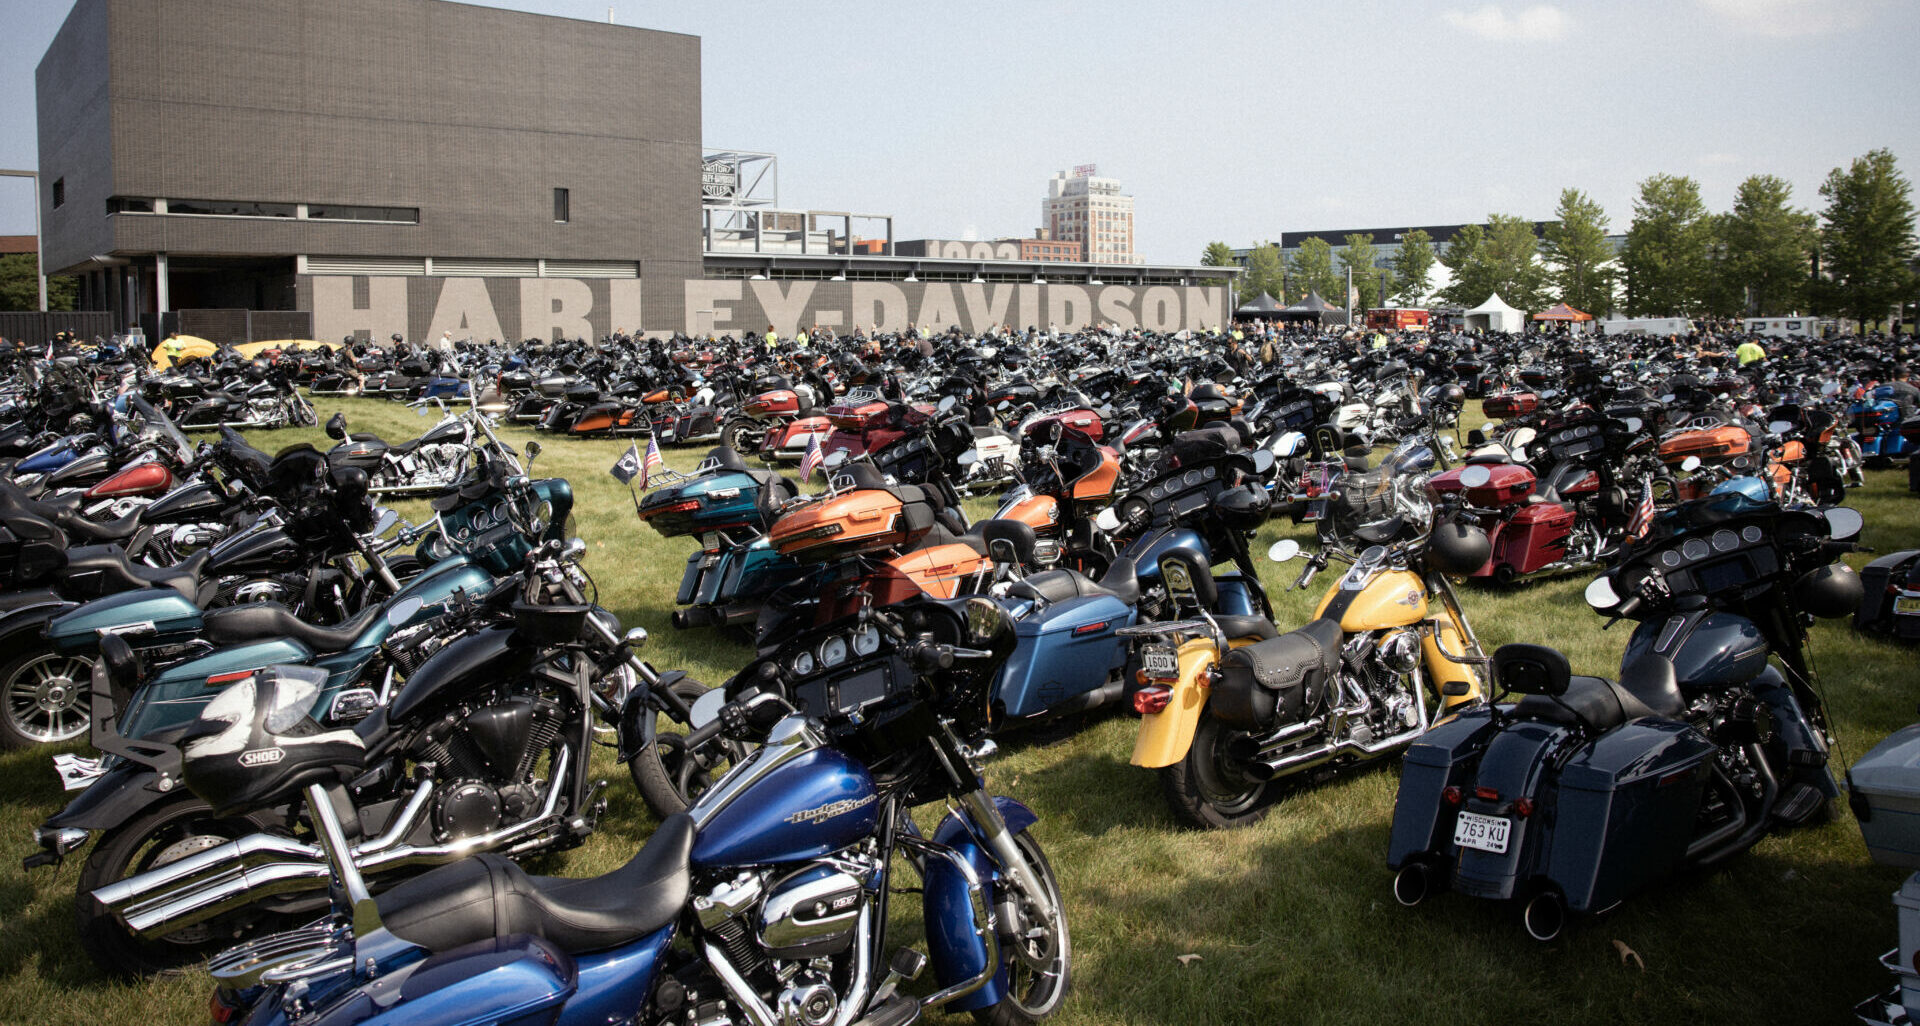 Harley-Davidson reports that 73,000 motorcycles turned up for events at the Harley-Davidson Museum, one of the venues in Milwaukee, Wisconsin, used for the Harley-Davidson Homecoming. Photo courtesy Harley-Davidson.